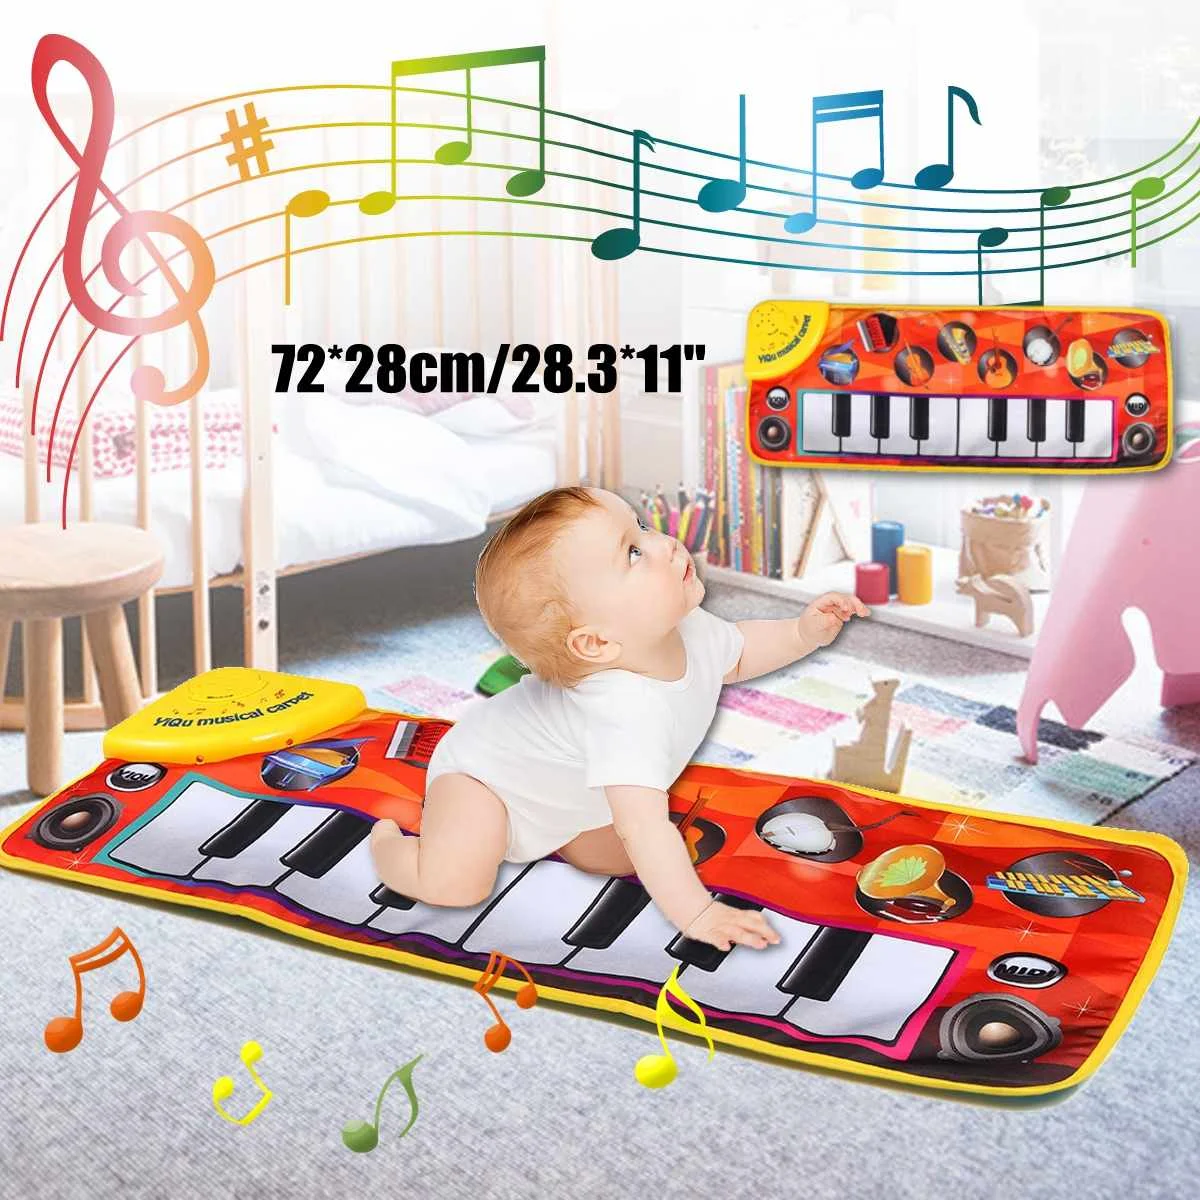 72x28cm Kids Baby Early Education Music Piano Keyboard Carpet Musical Mat Blanket Touch Play Safety Learn Singing Funny Toy